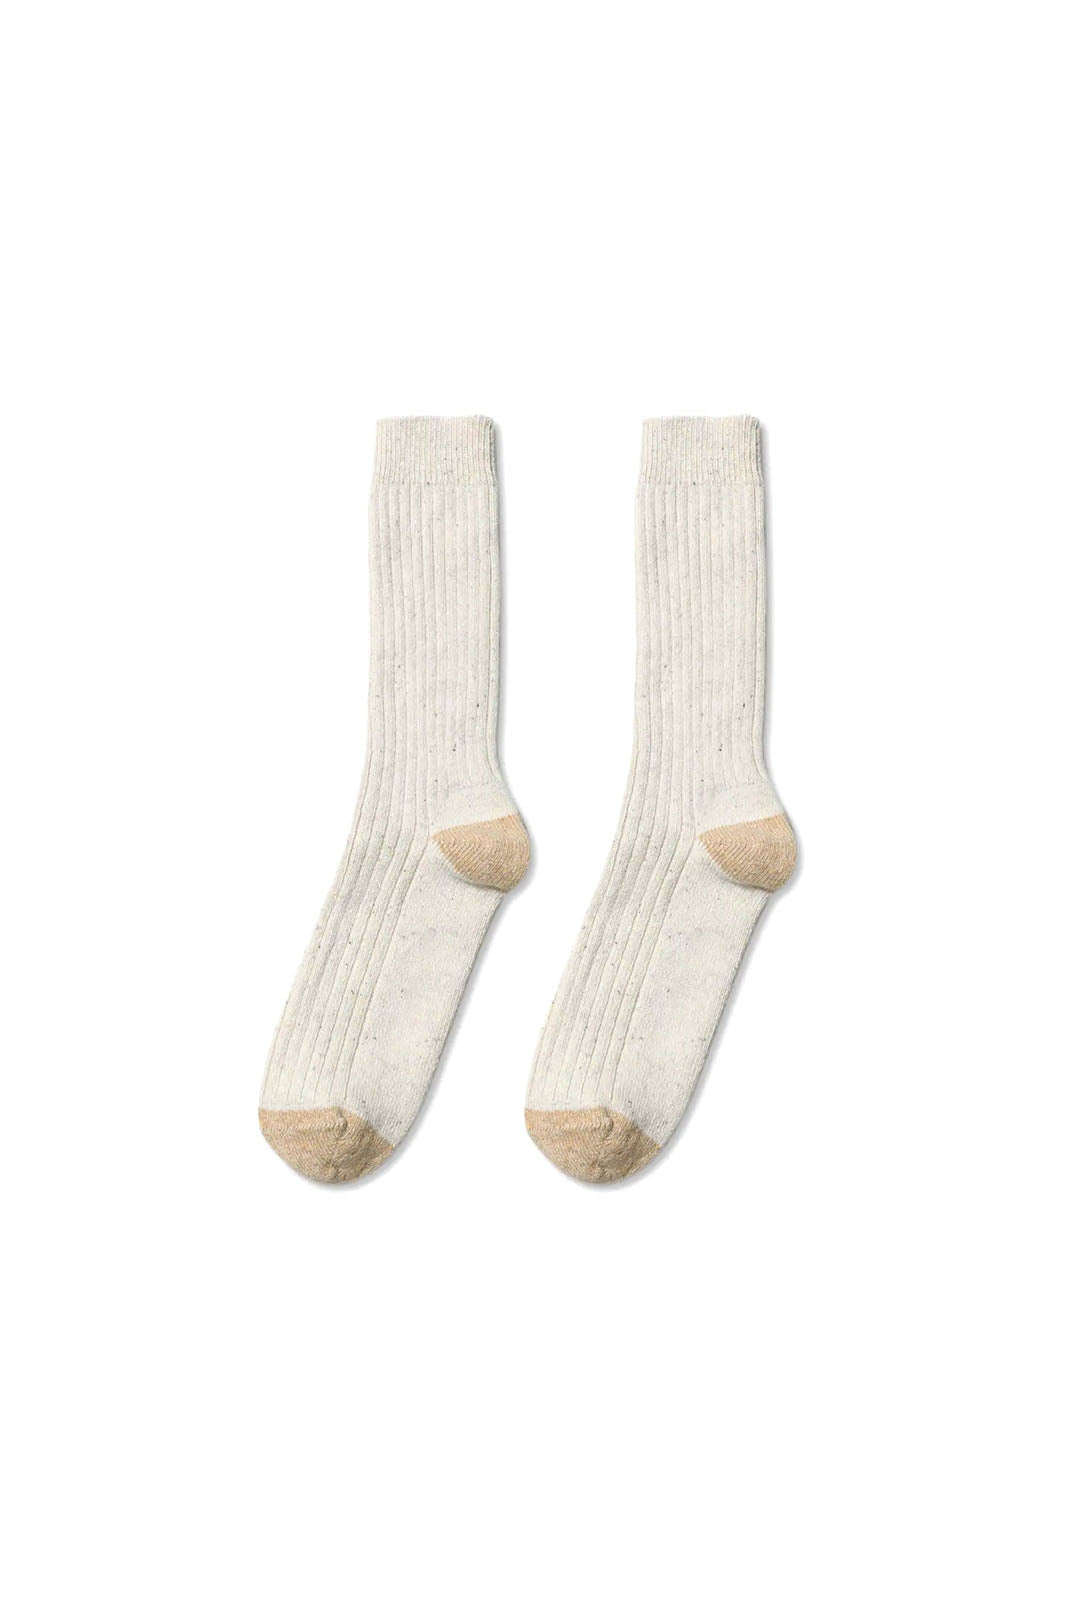 Cream colored and textured knit socks with tan heel and toe.